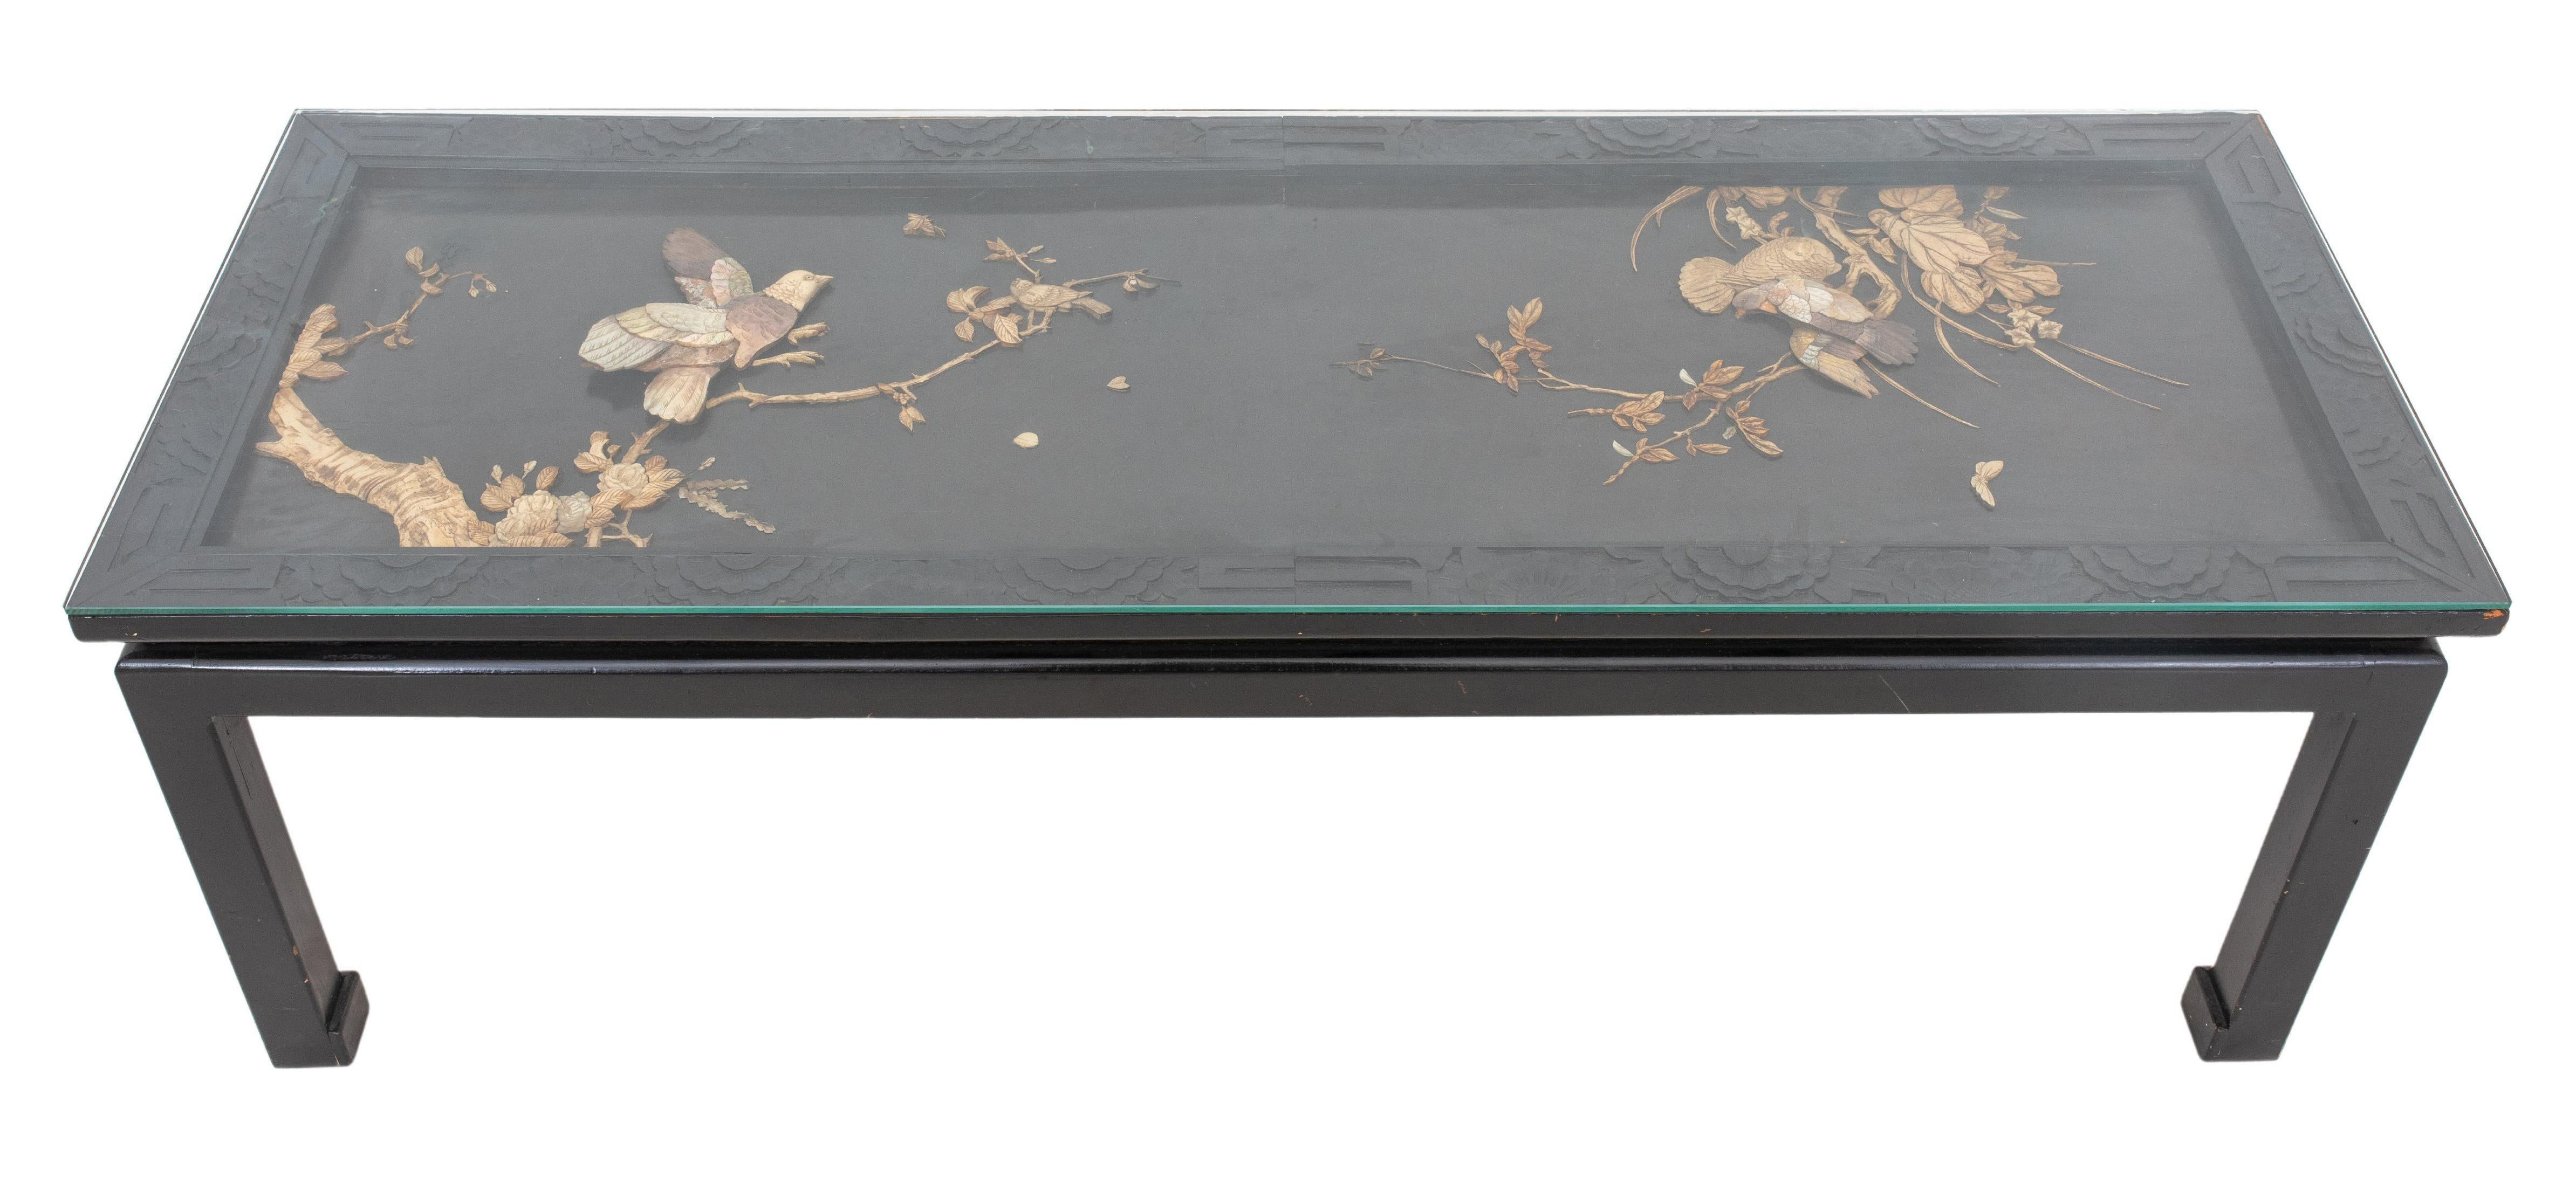 CHINESE INLAID SCREEN PANEL MOUNTED 30c4fb